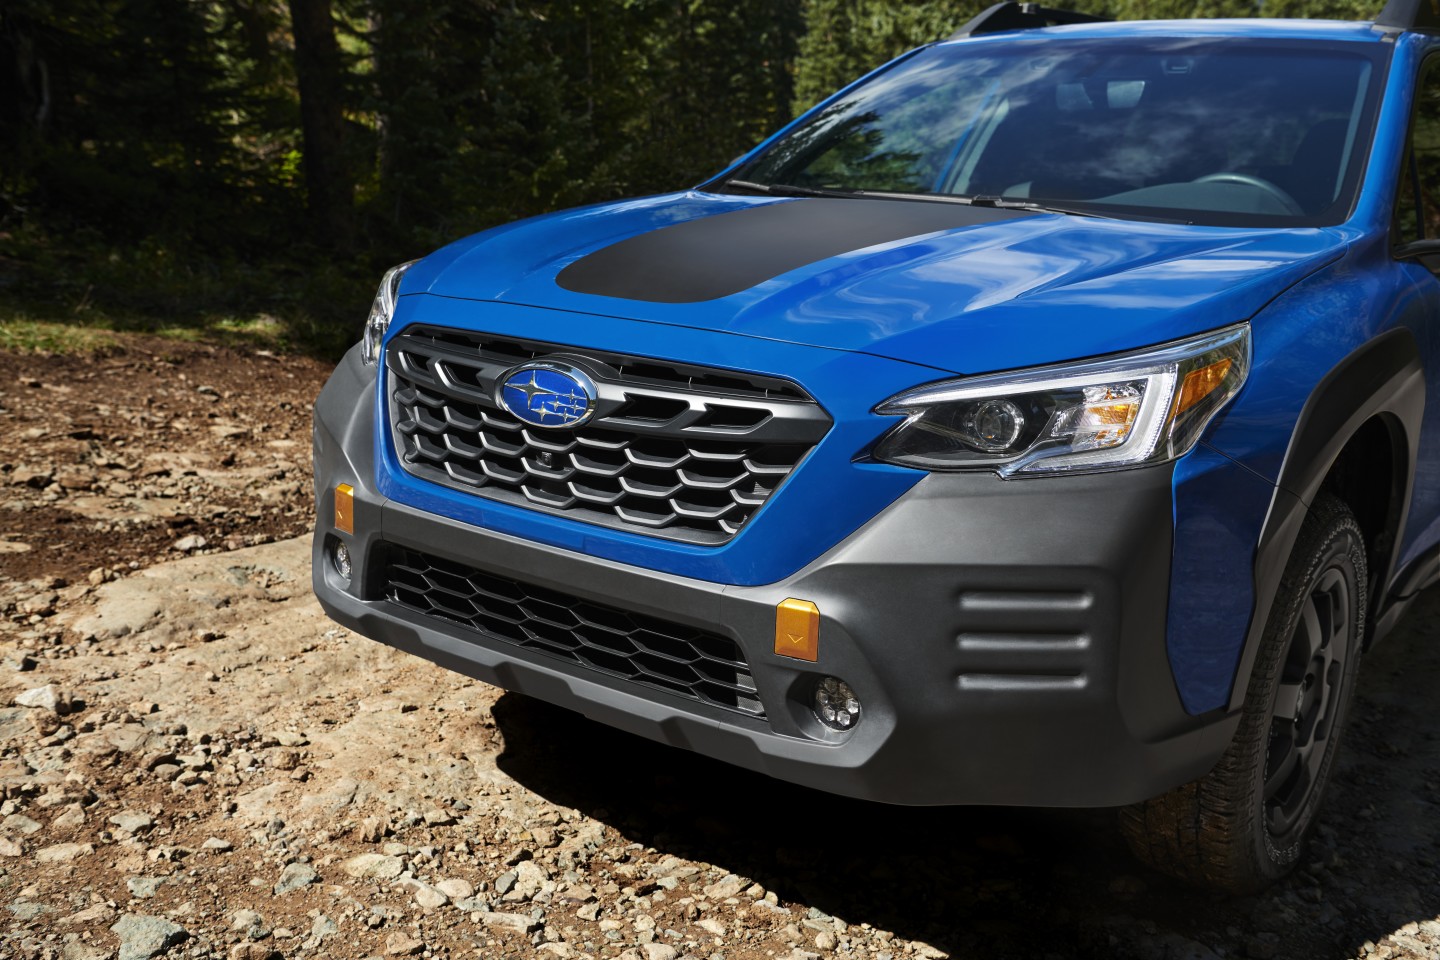 The matte black hood strip on the Subaru Outback Wilderness helps reduce sun glare for the driver